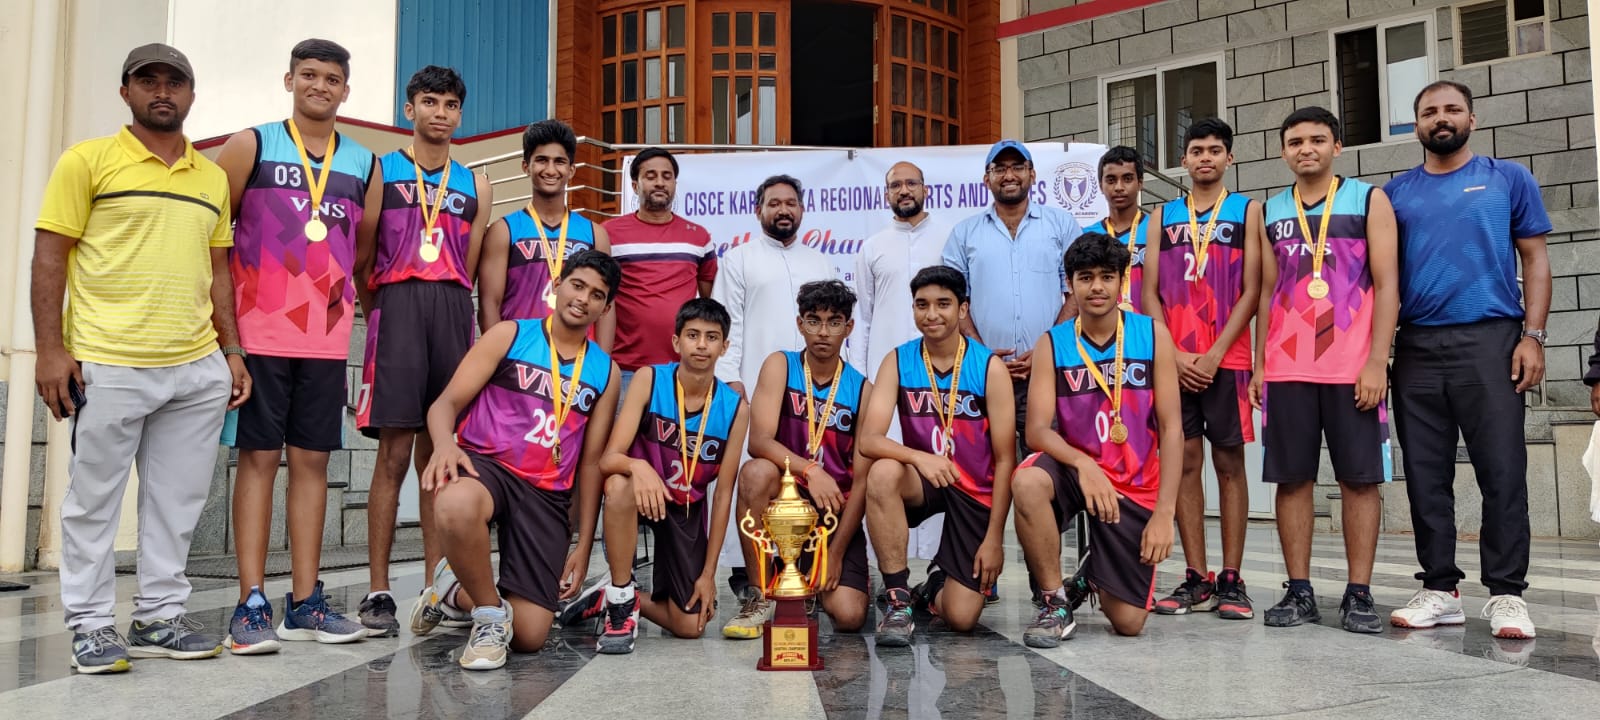 <strong>VNS team Under 17 Boys winners of the championship</strong>